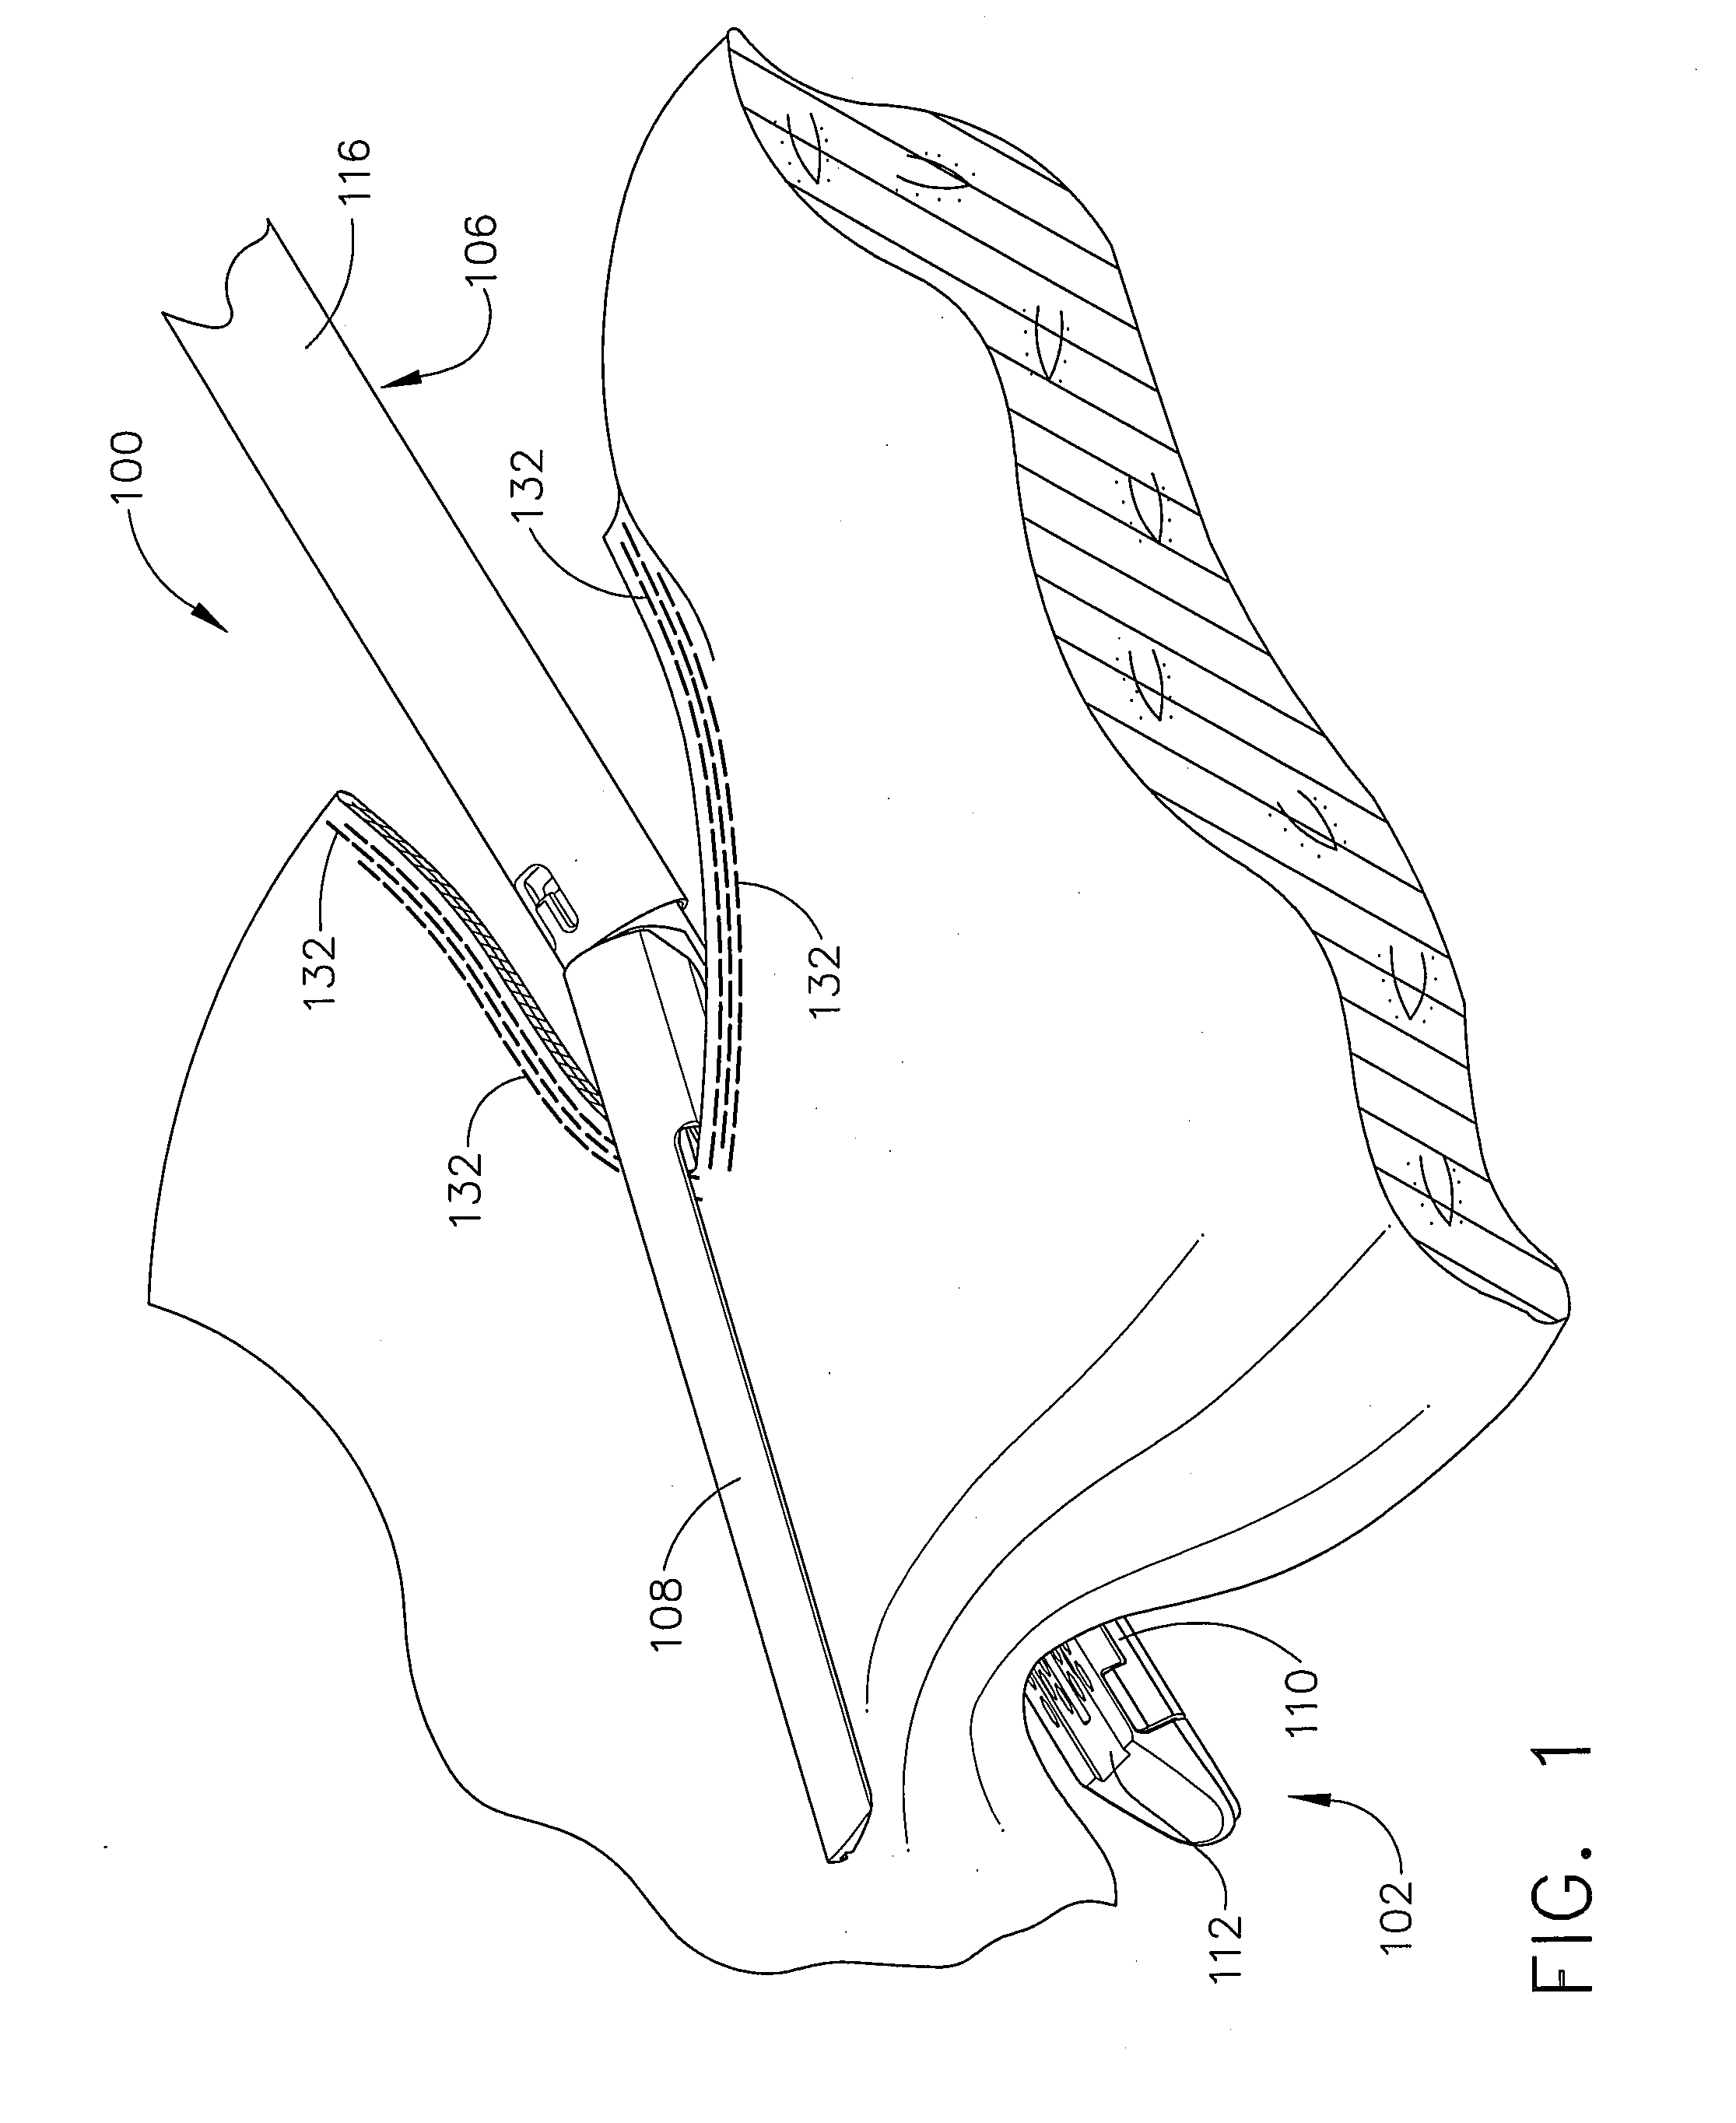 Surgical stapling device with a curved cutting member